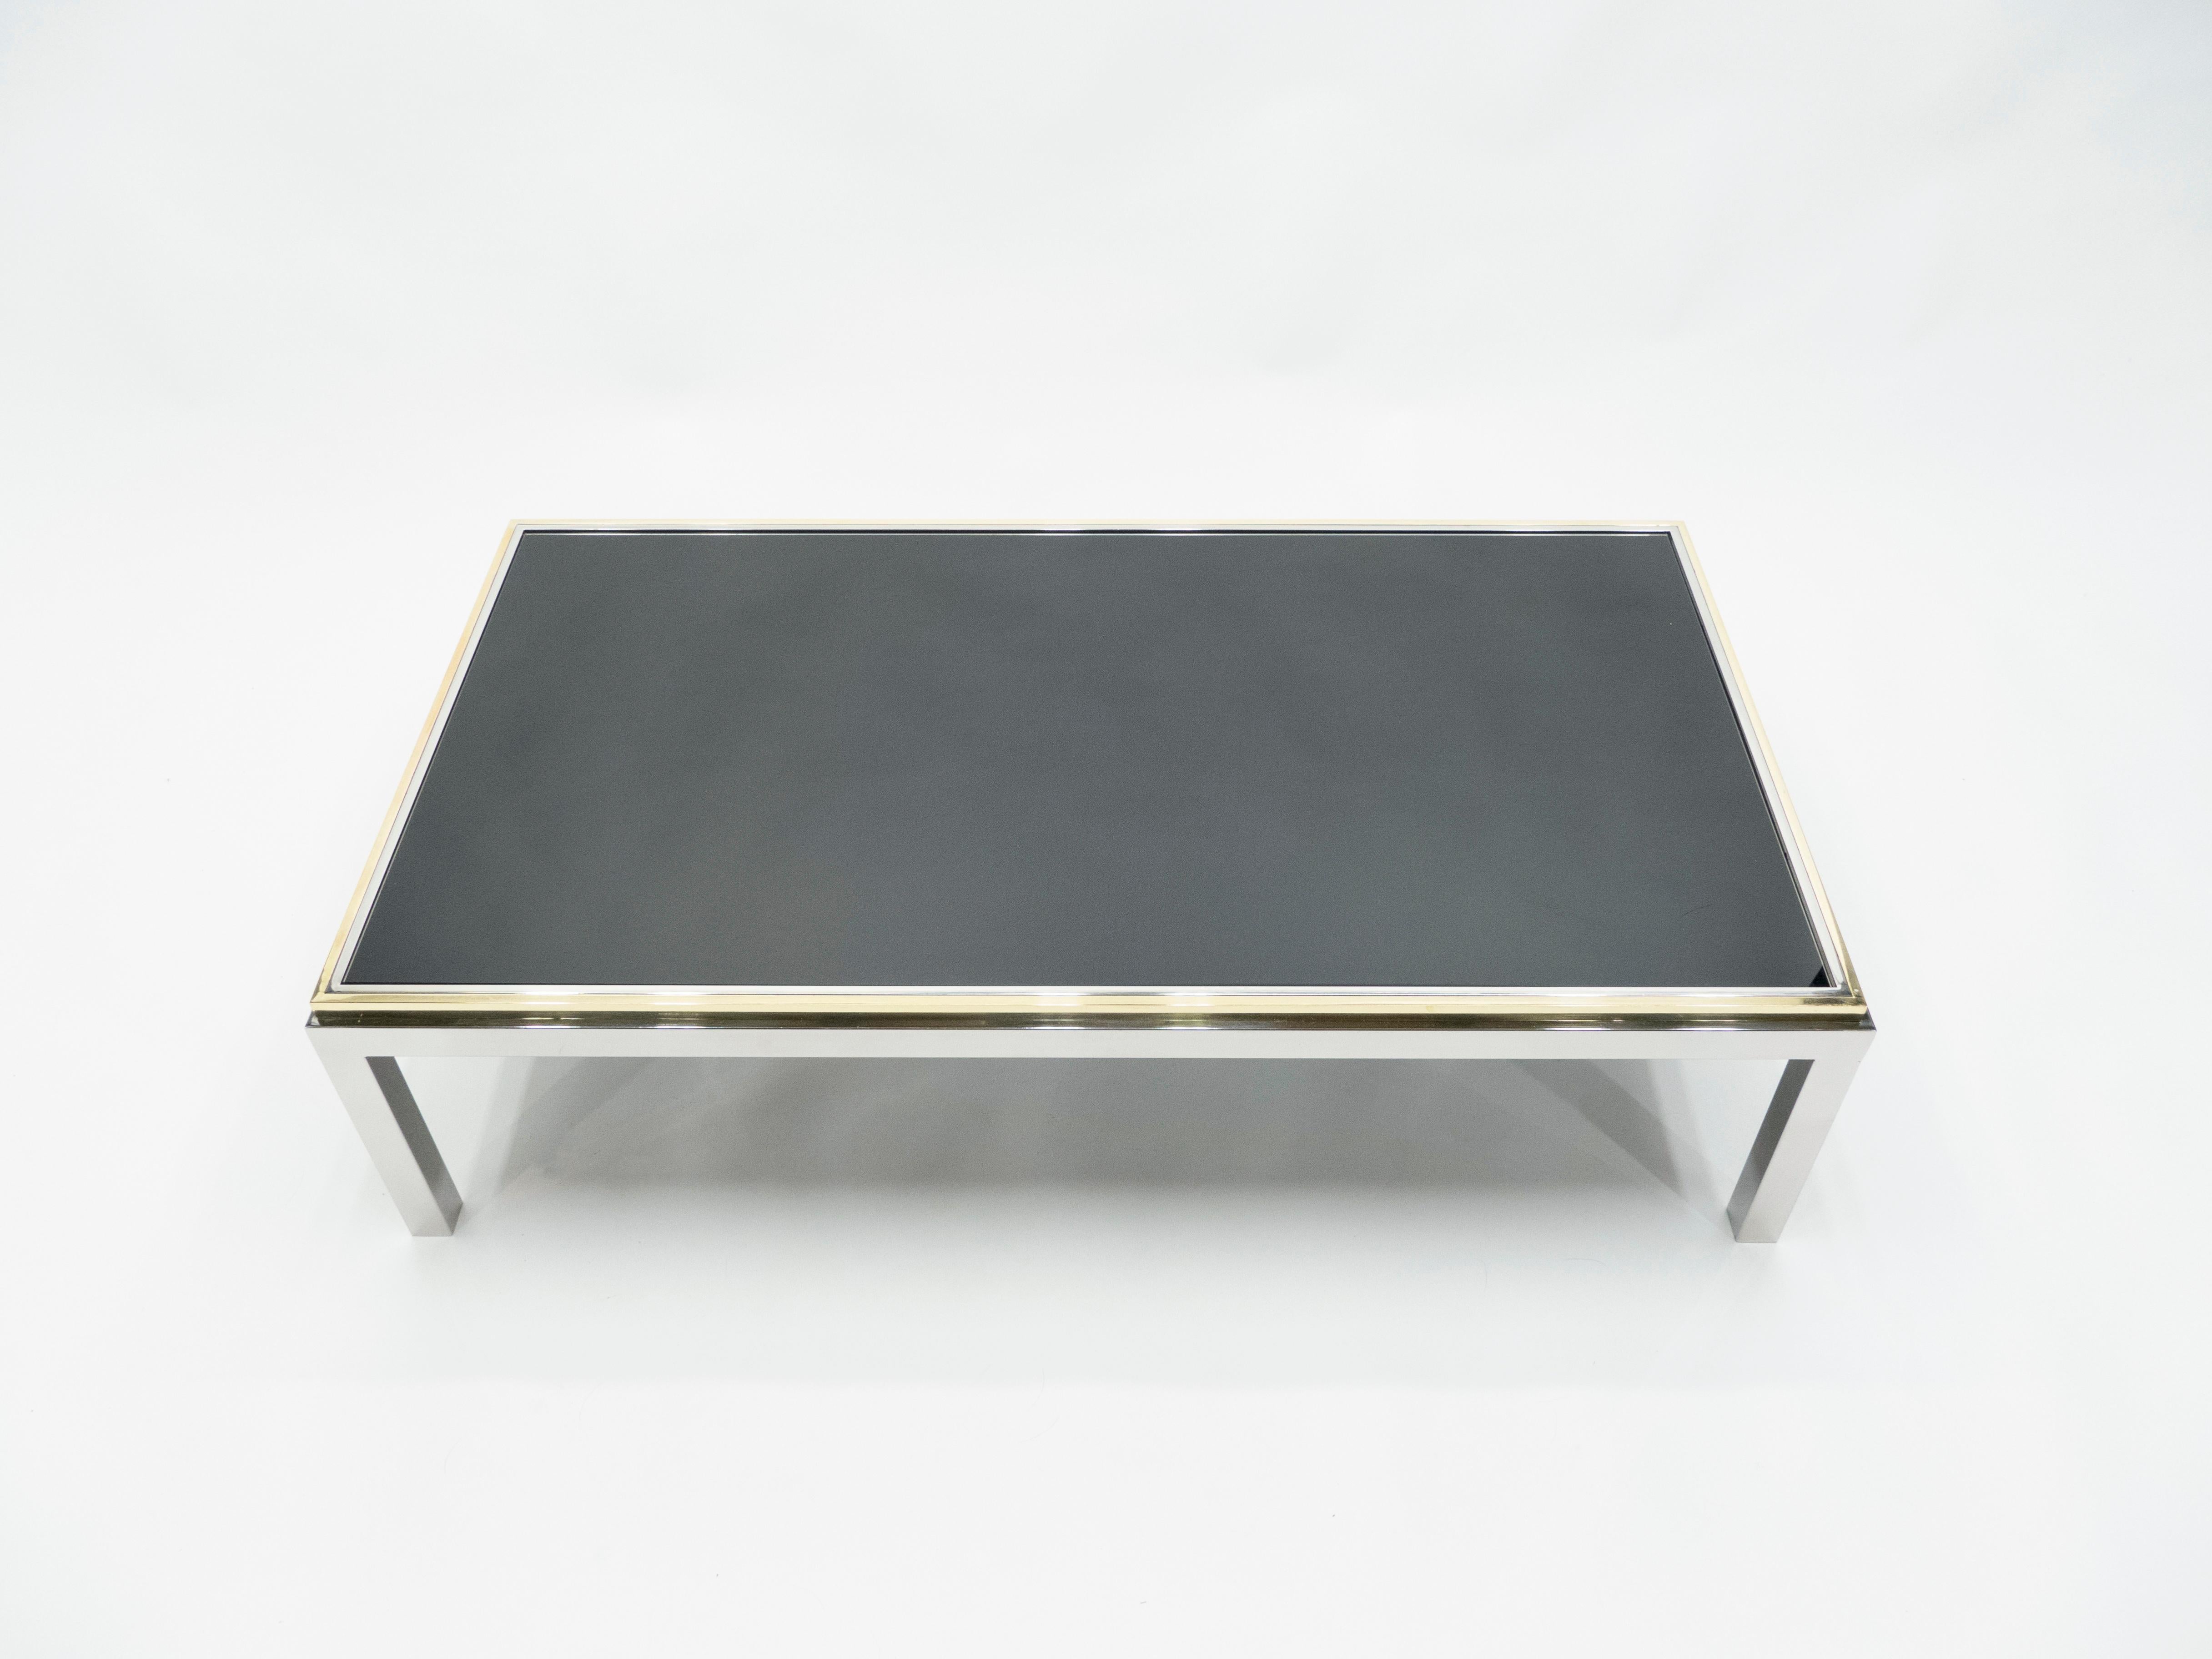 This stunning coffee table is guaranteed to be the focus of attention when you entertain guests in your living room. Following the glamorous Italian Hollywood Regency look of other Classic Willy Rizzo designs, this Flaminia model coffee table